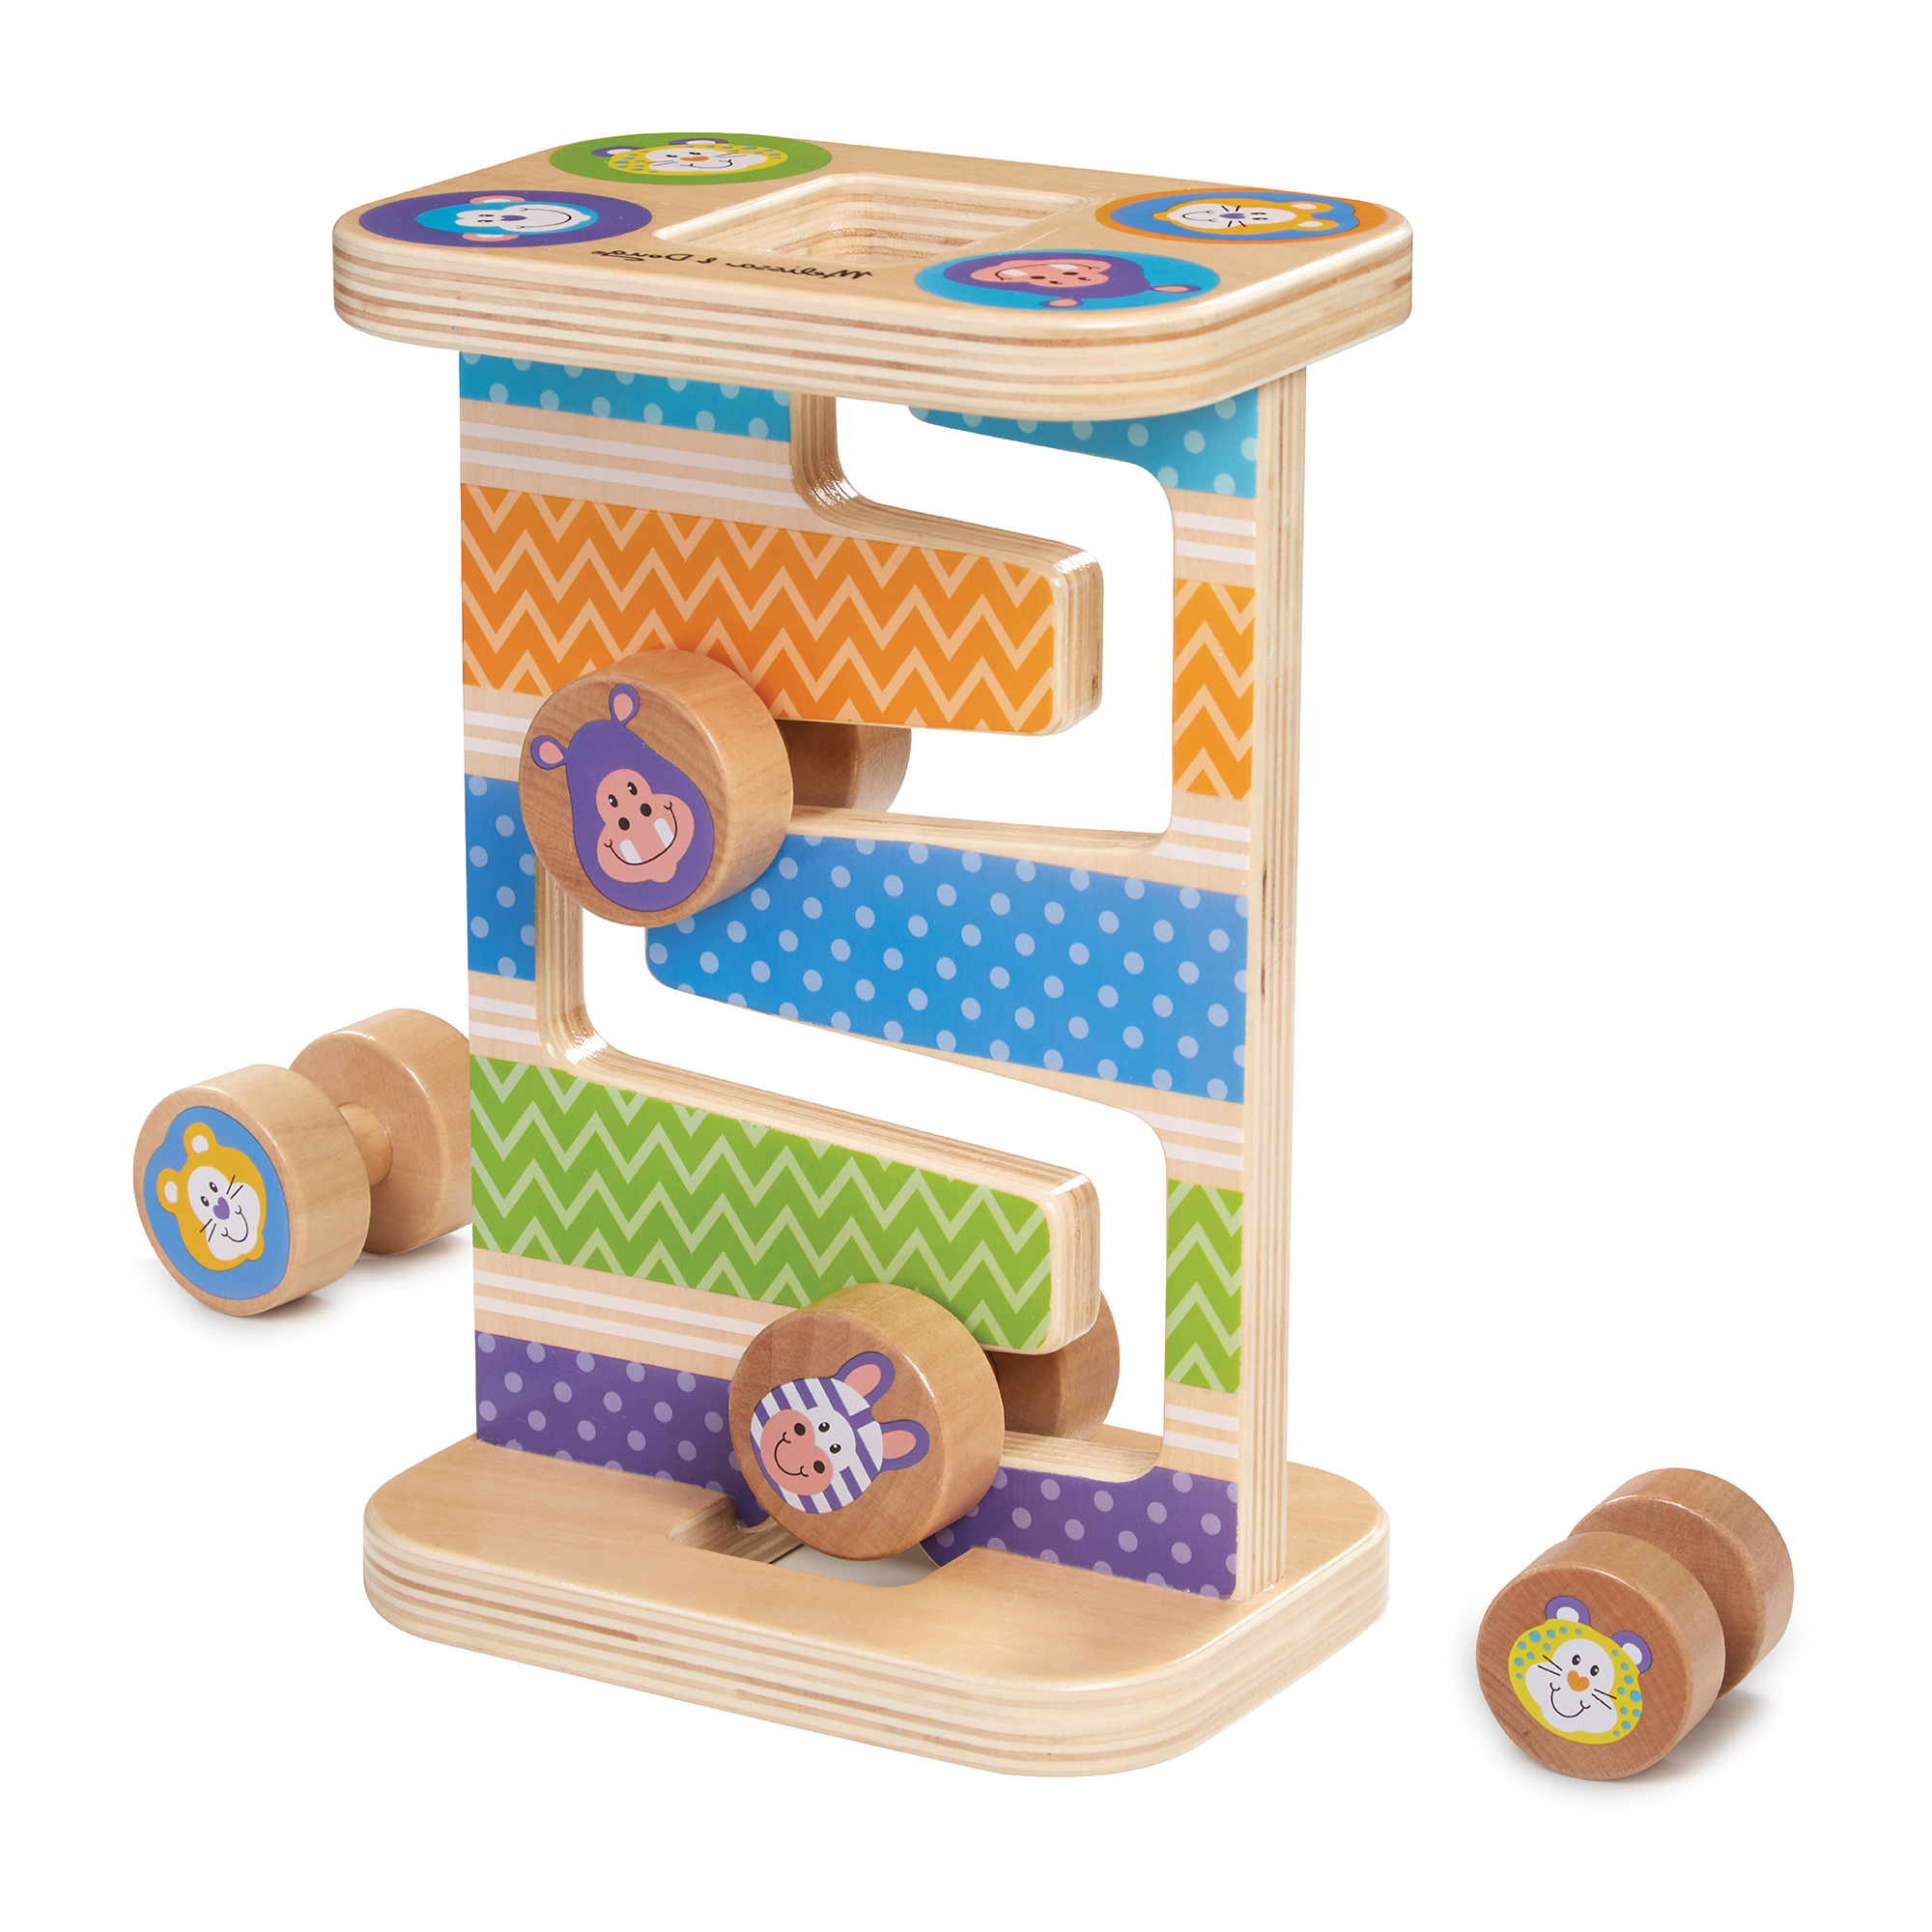 Melissa & Doug First Play Wooden Safari Zig-Zag Tower With 4 Rolling Pieces - image 1 of 10